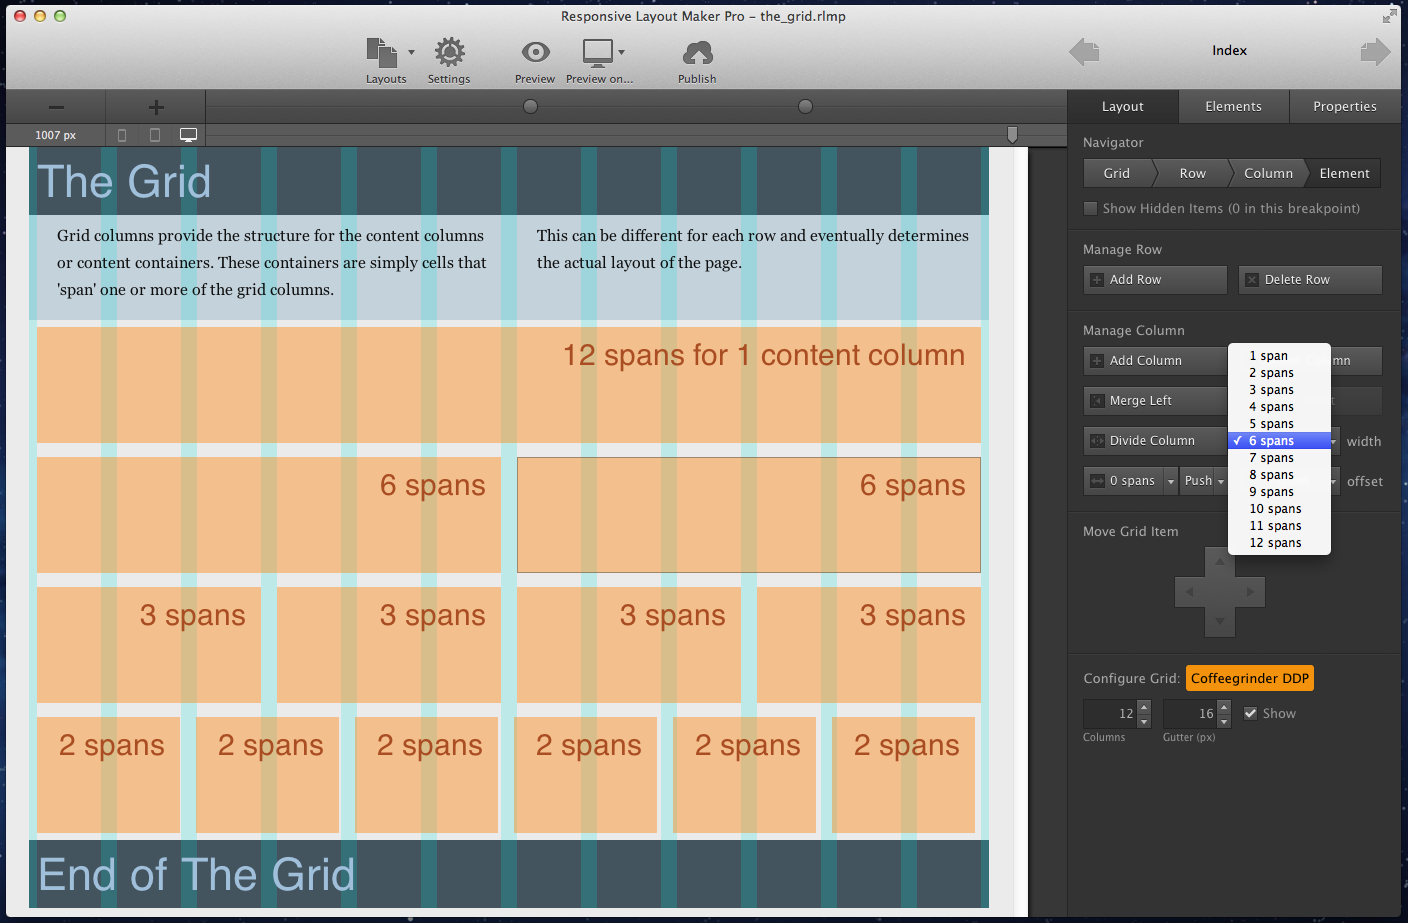 Responsive Layout Maker uses a grid system